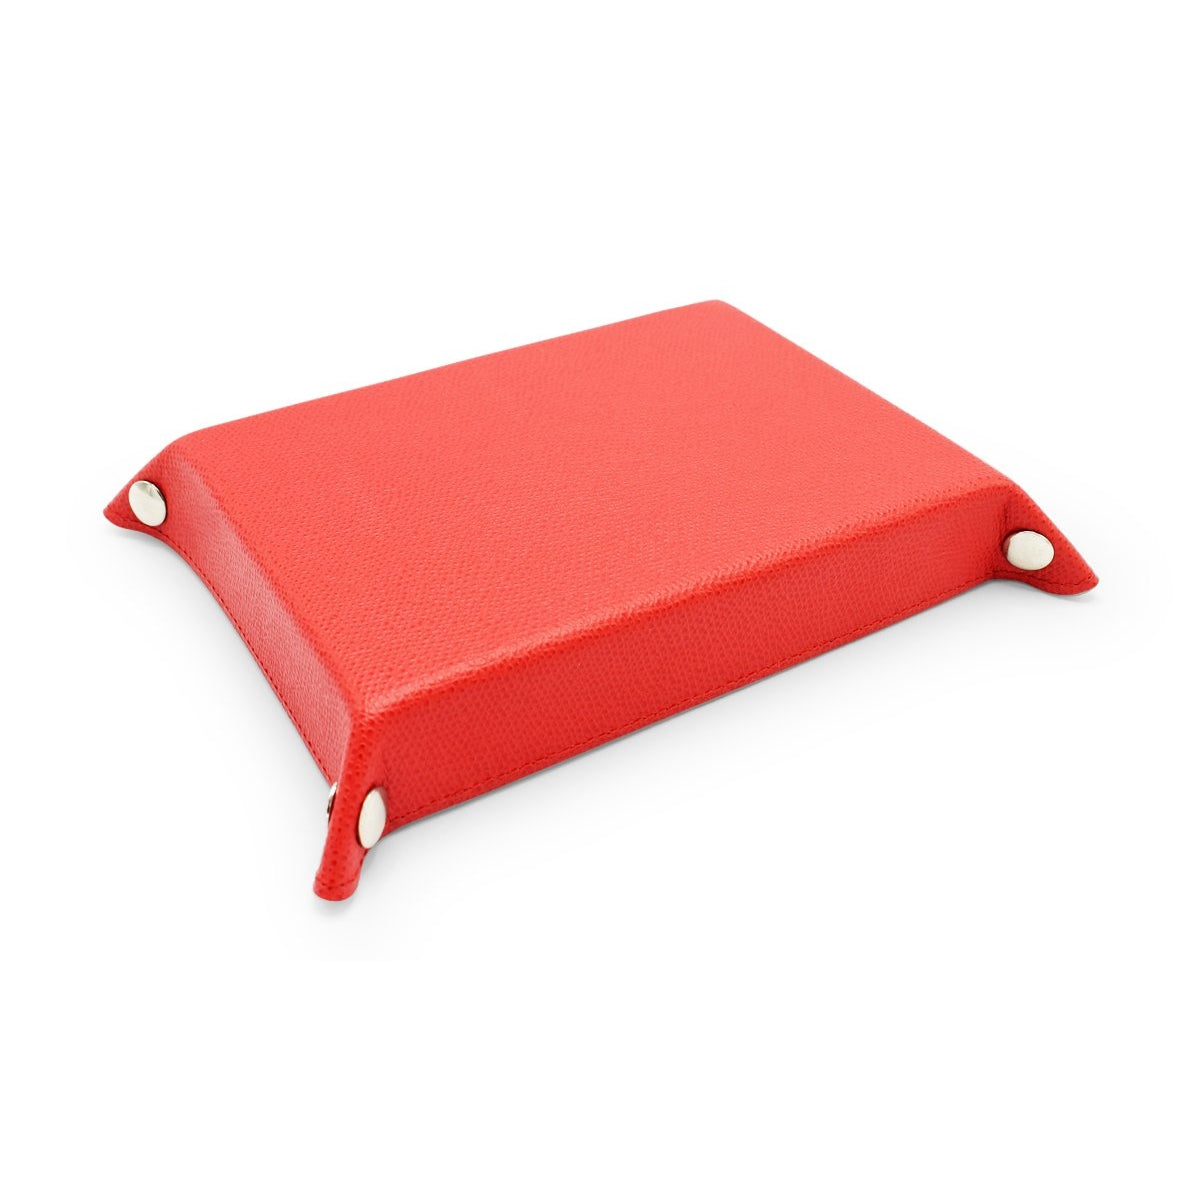 Elliot Rhodes Dauphin Leather Tray Red